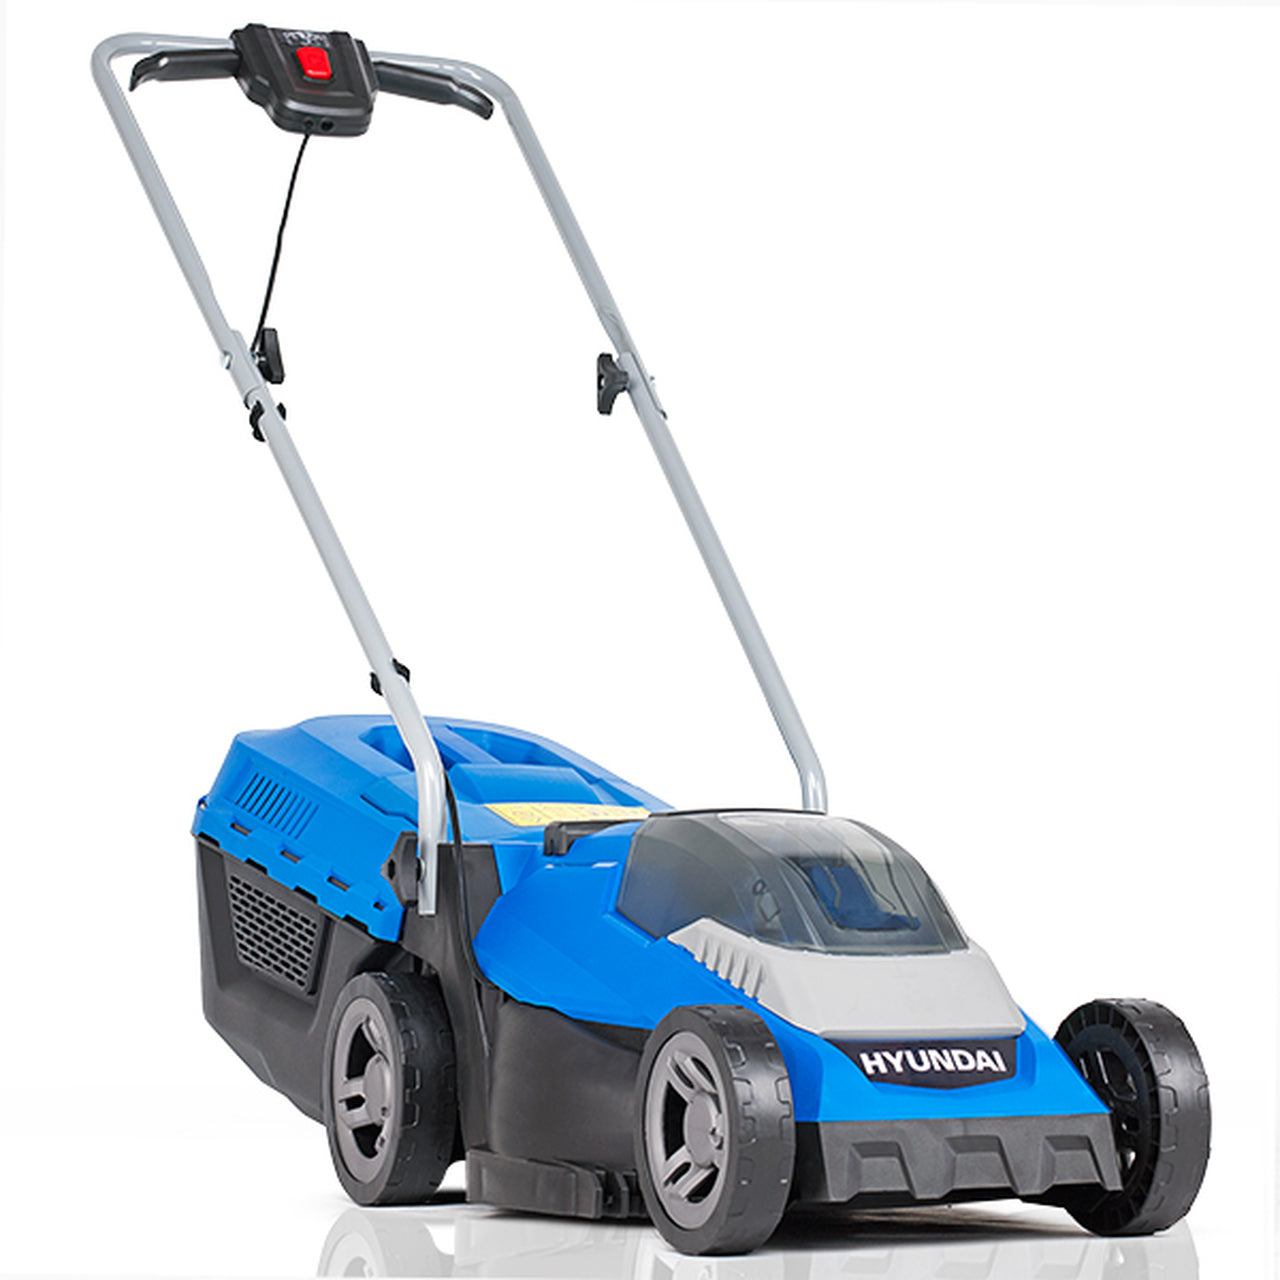 Hyundai HYM40LI330P 40V Lithium-Ion Cordless Roller Lawn Mower With Battery & Charger